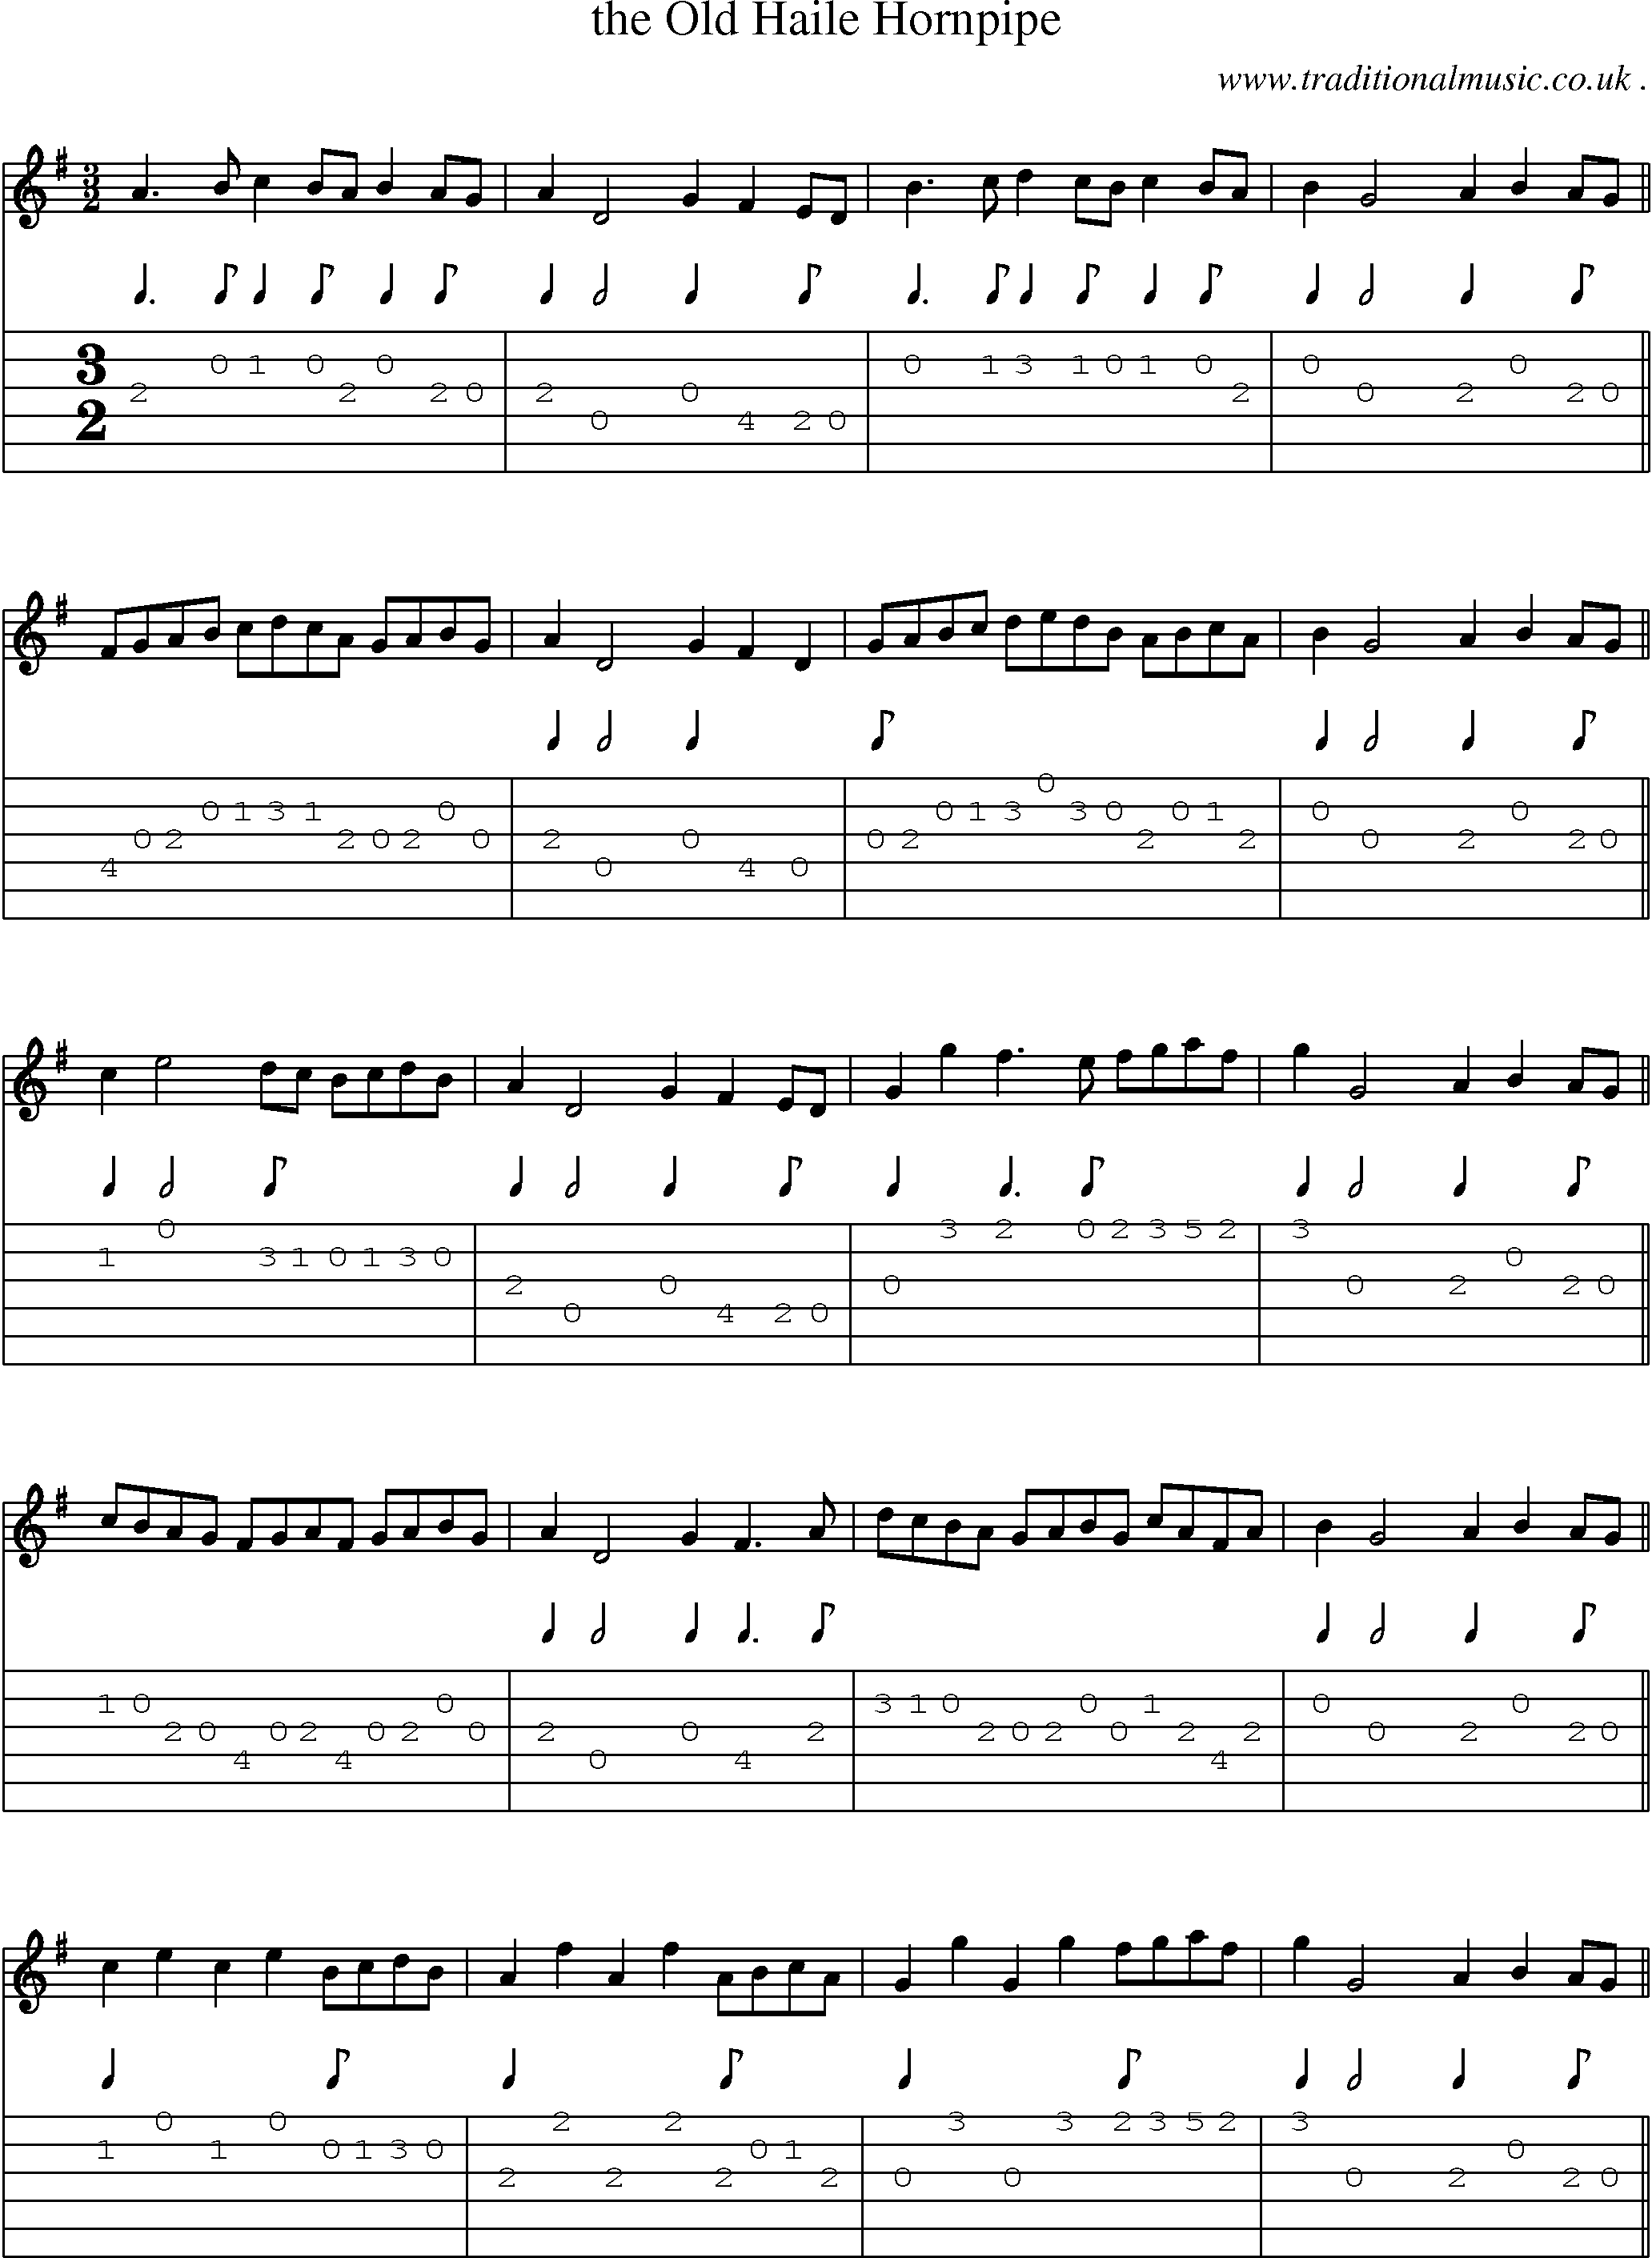 Sheet-Music and Guitar Tabs for The Old Haile Hornpipe